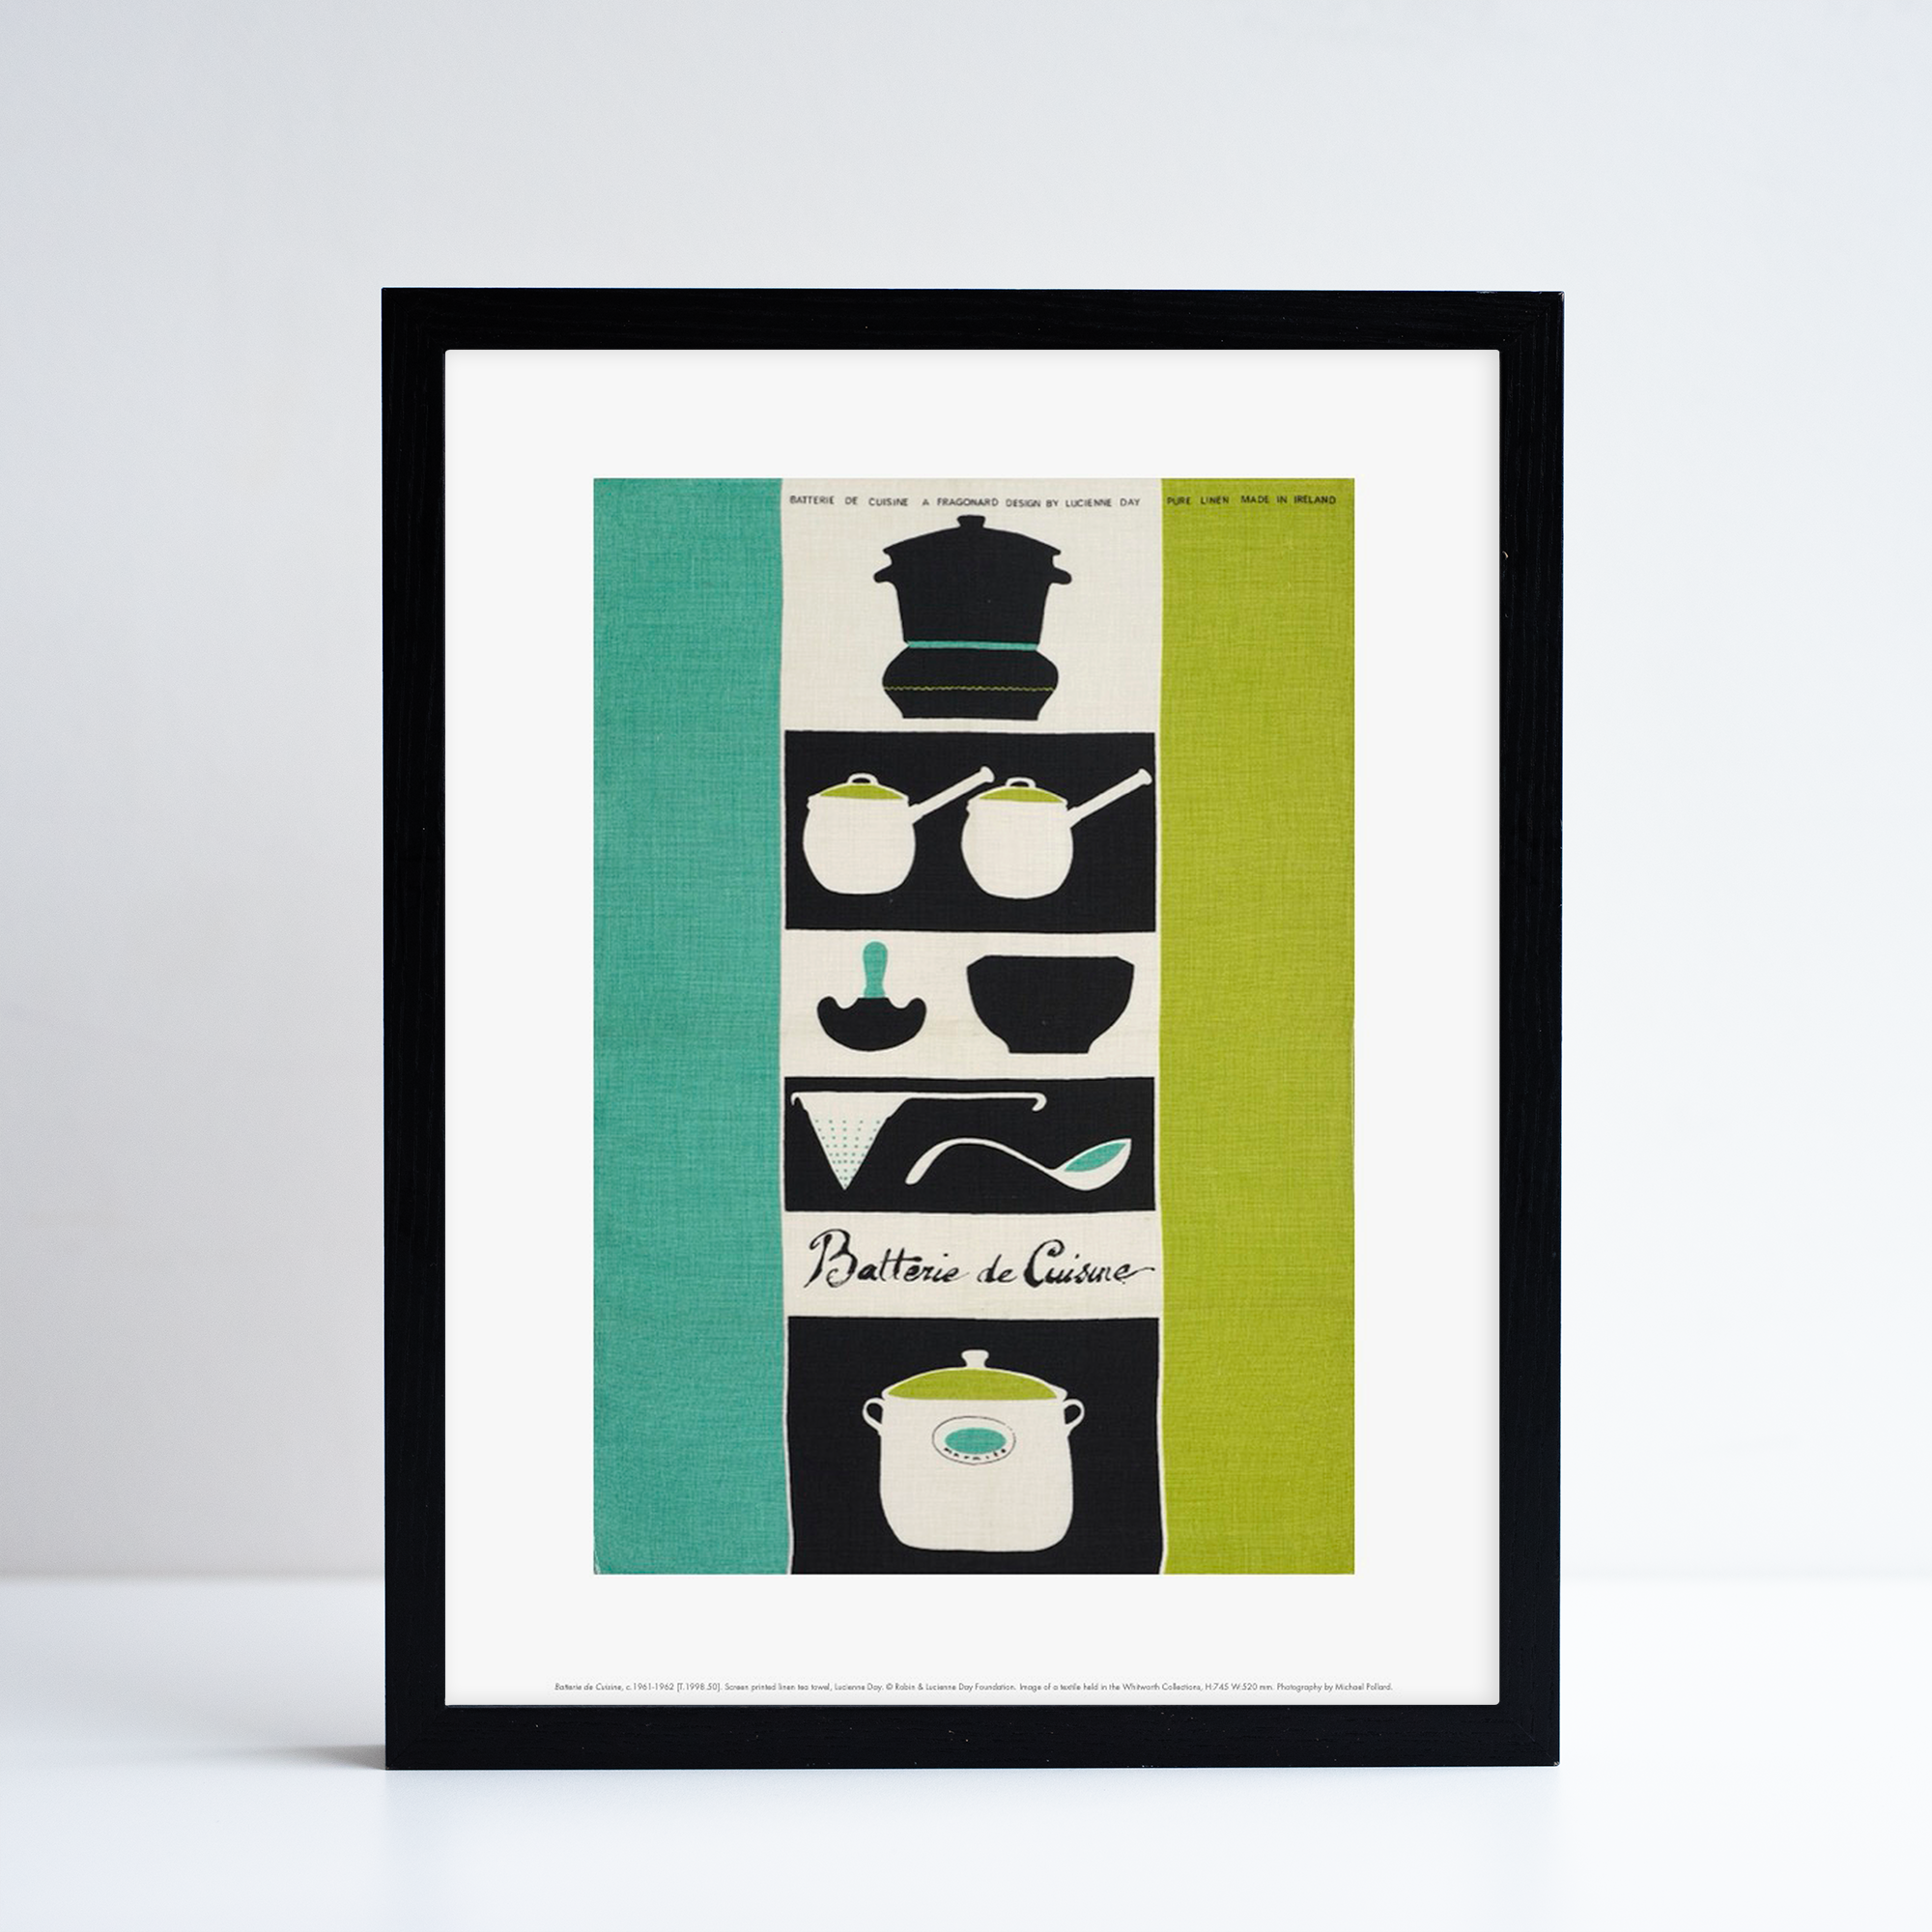 Framed reproduction of Batterie de Cuisine by Lucienne Day. A green, black and white print with Kitchenware at the centre.